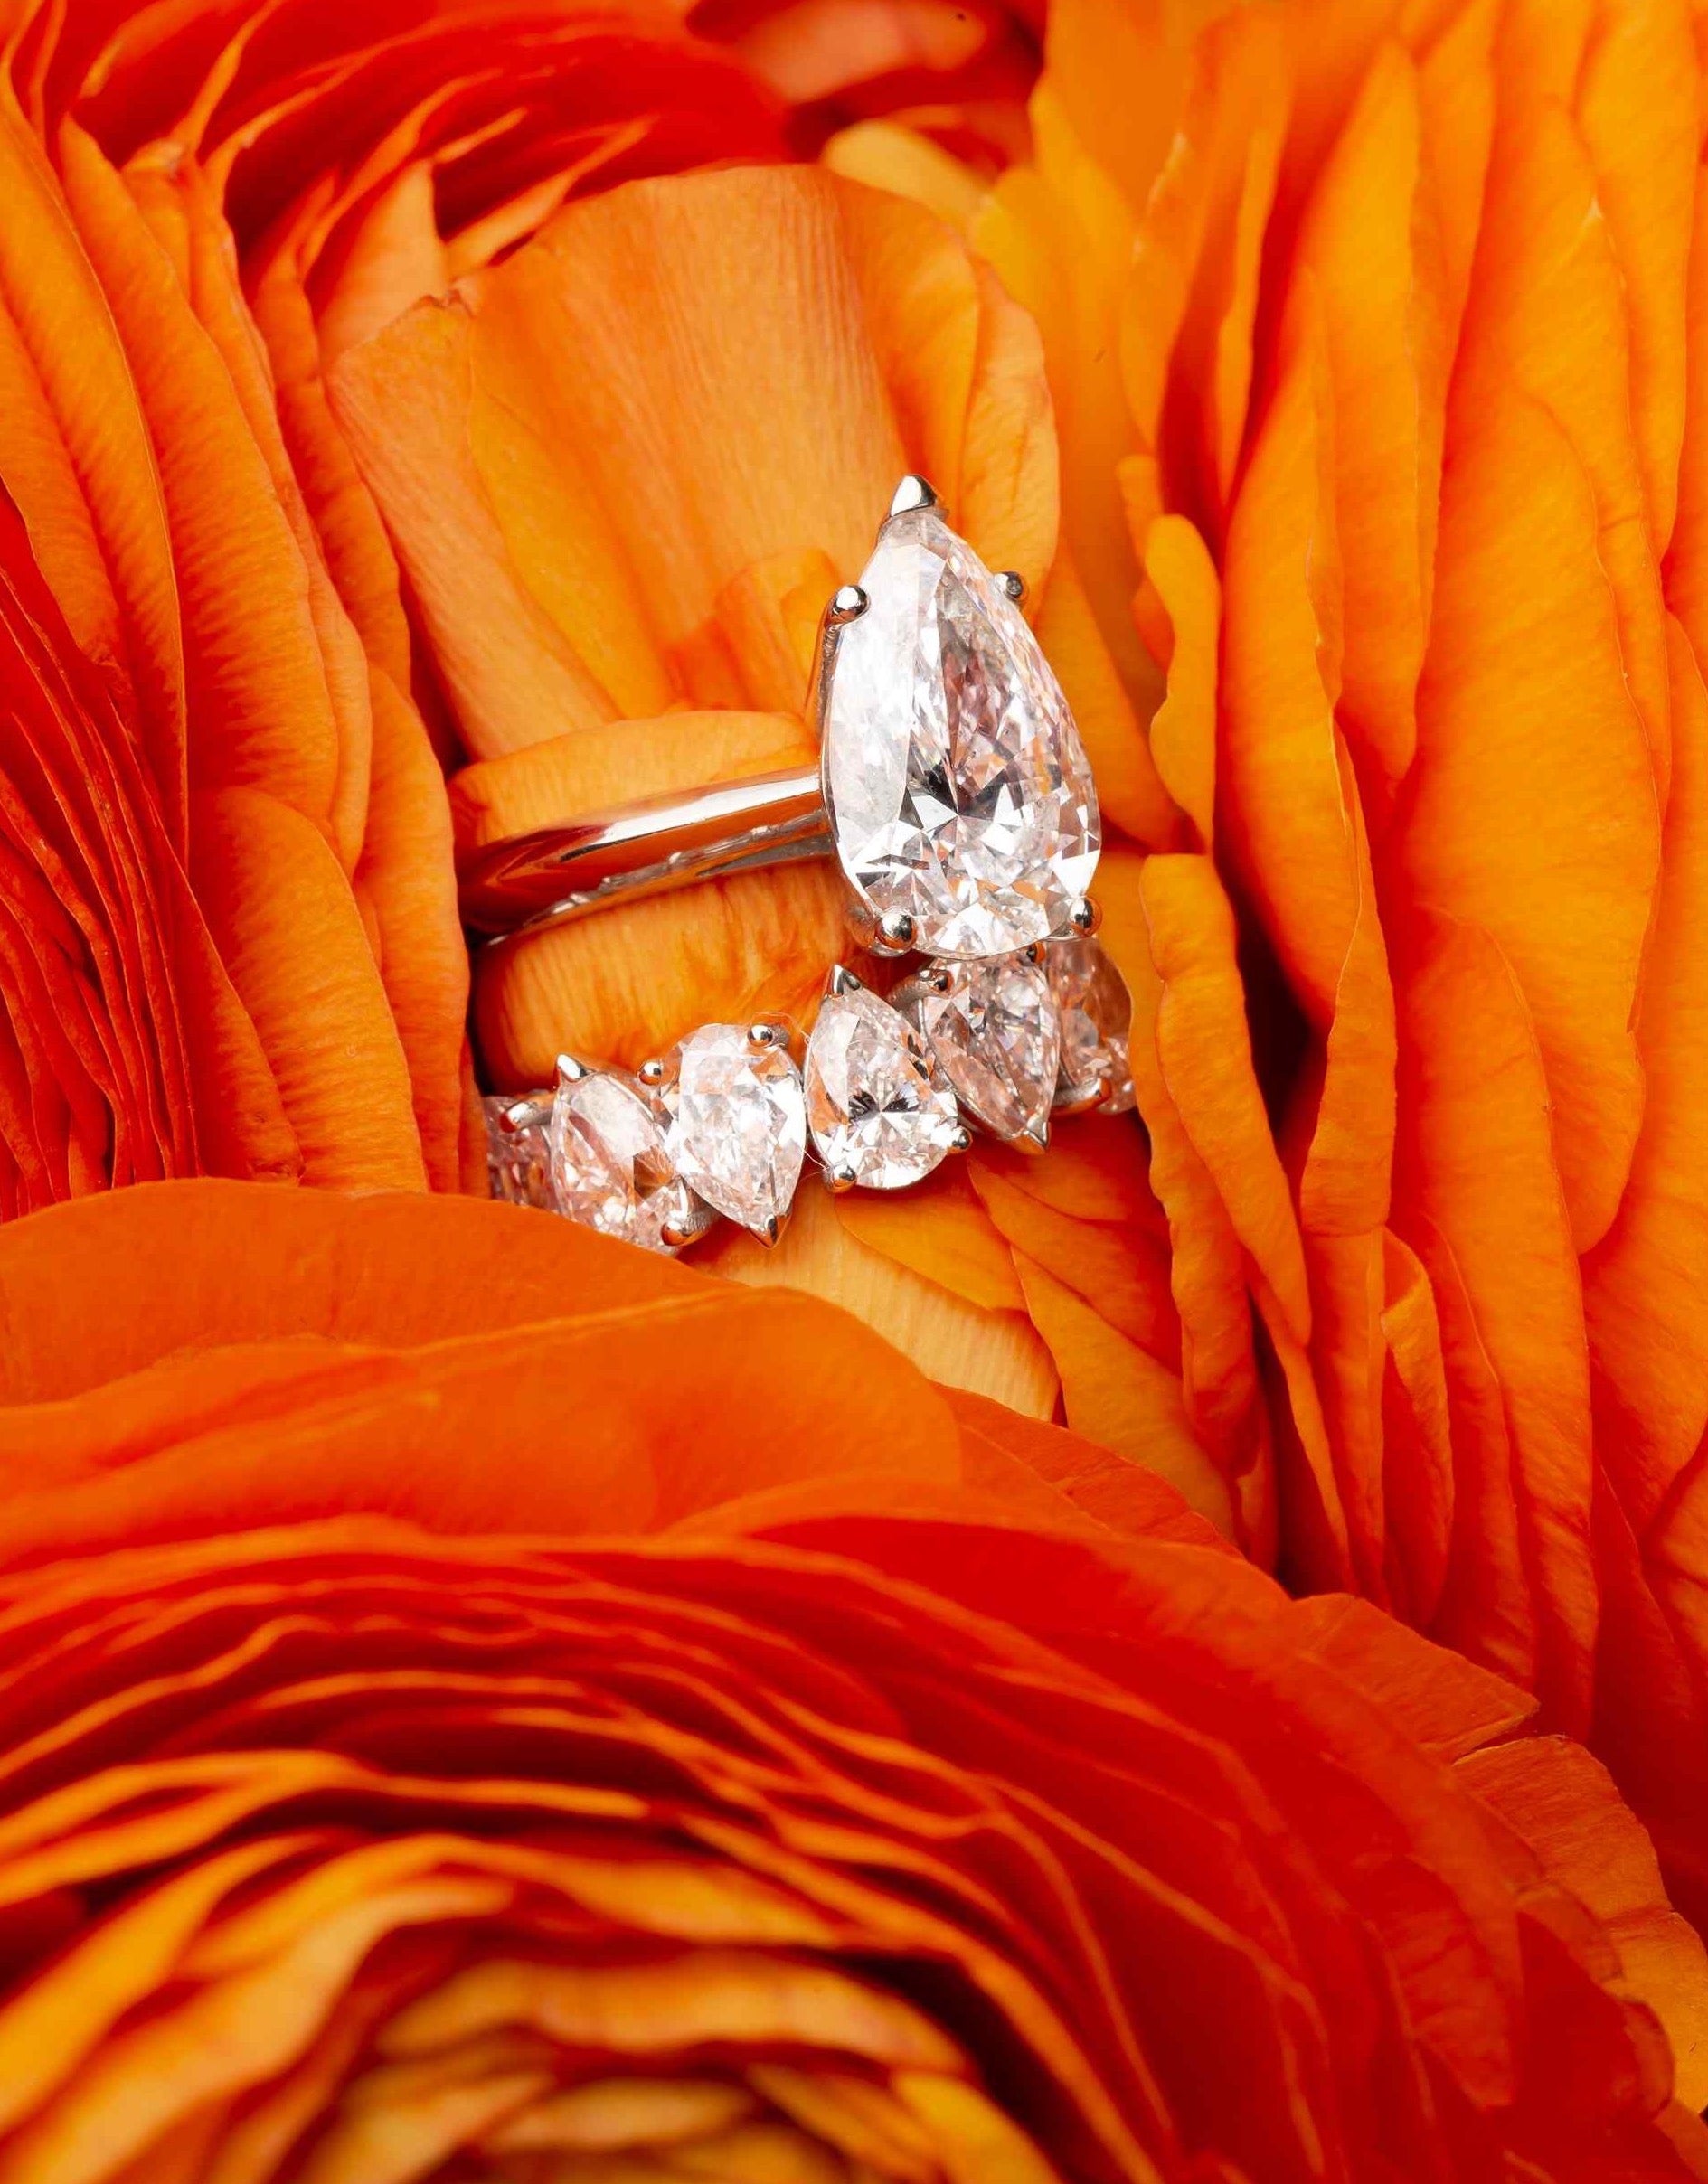 A 3.5 carat Pear diamond solitaire radiates in a knife-edge setting of Palladium & 18K White Gold, sitting between the petals of a deeply vibrant orange flower. The magic of the pear diamond is replicated with a matching 5tcw Sans Cesse Pear ring in White Gold.